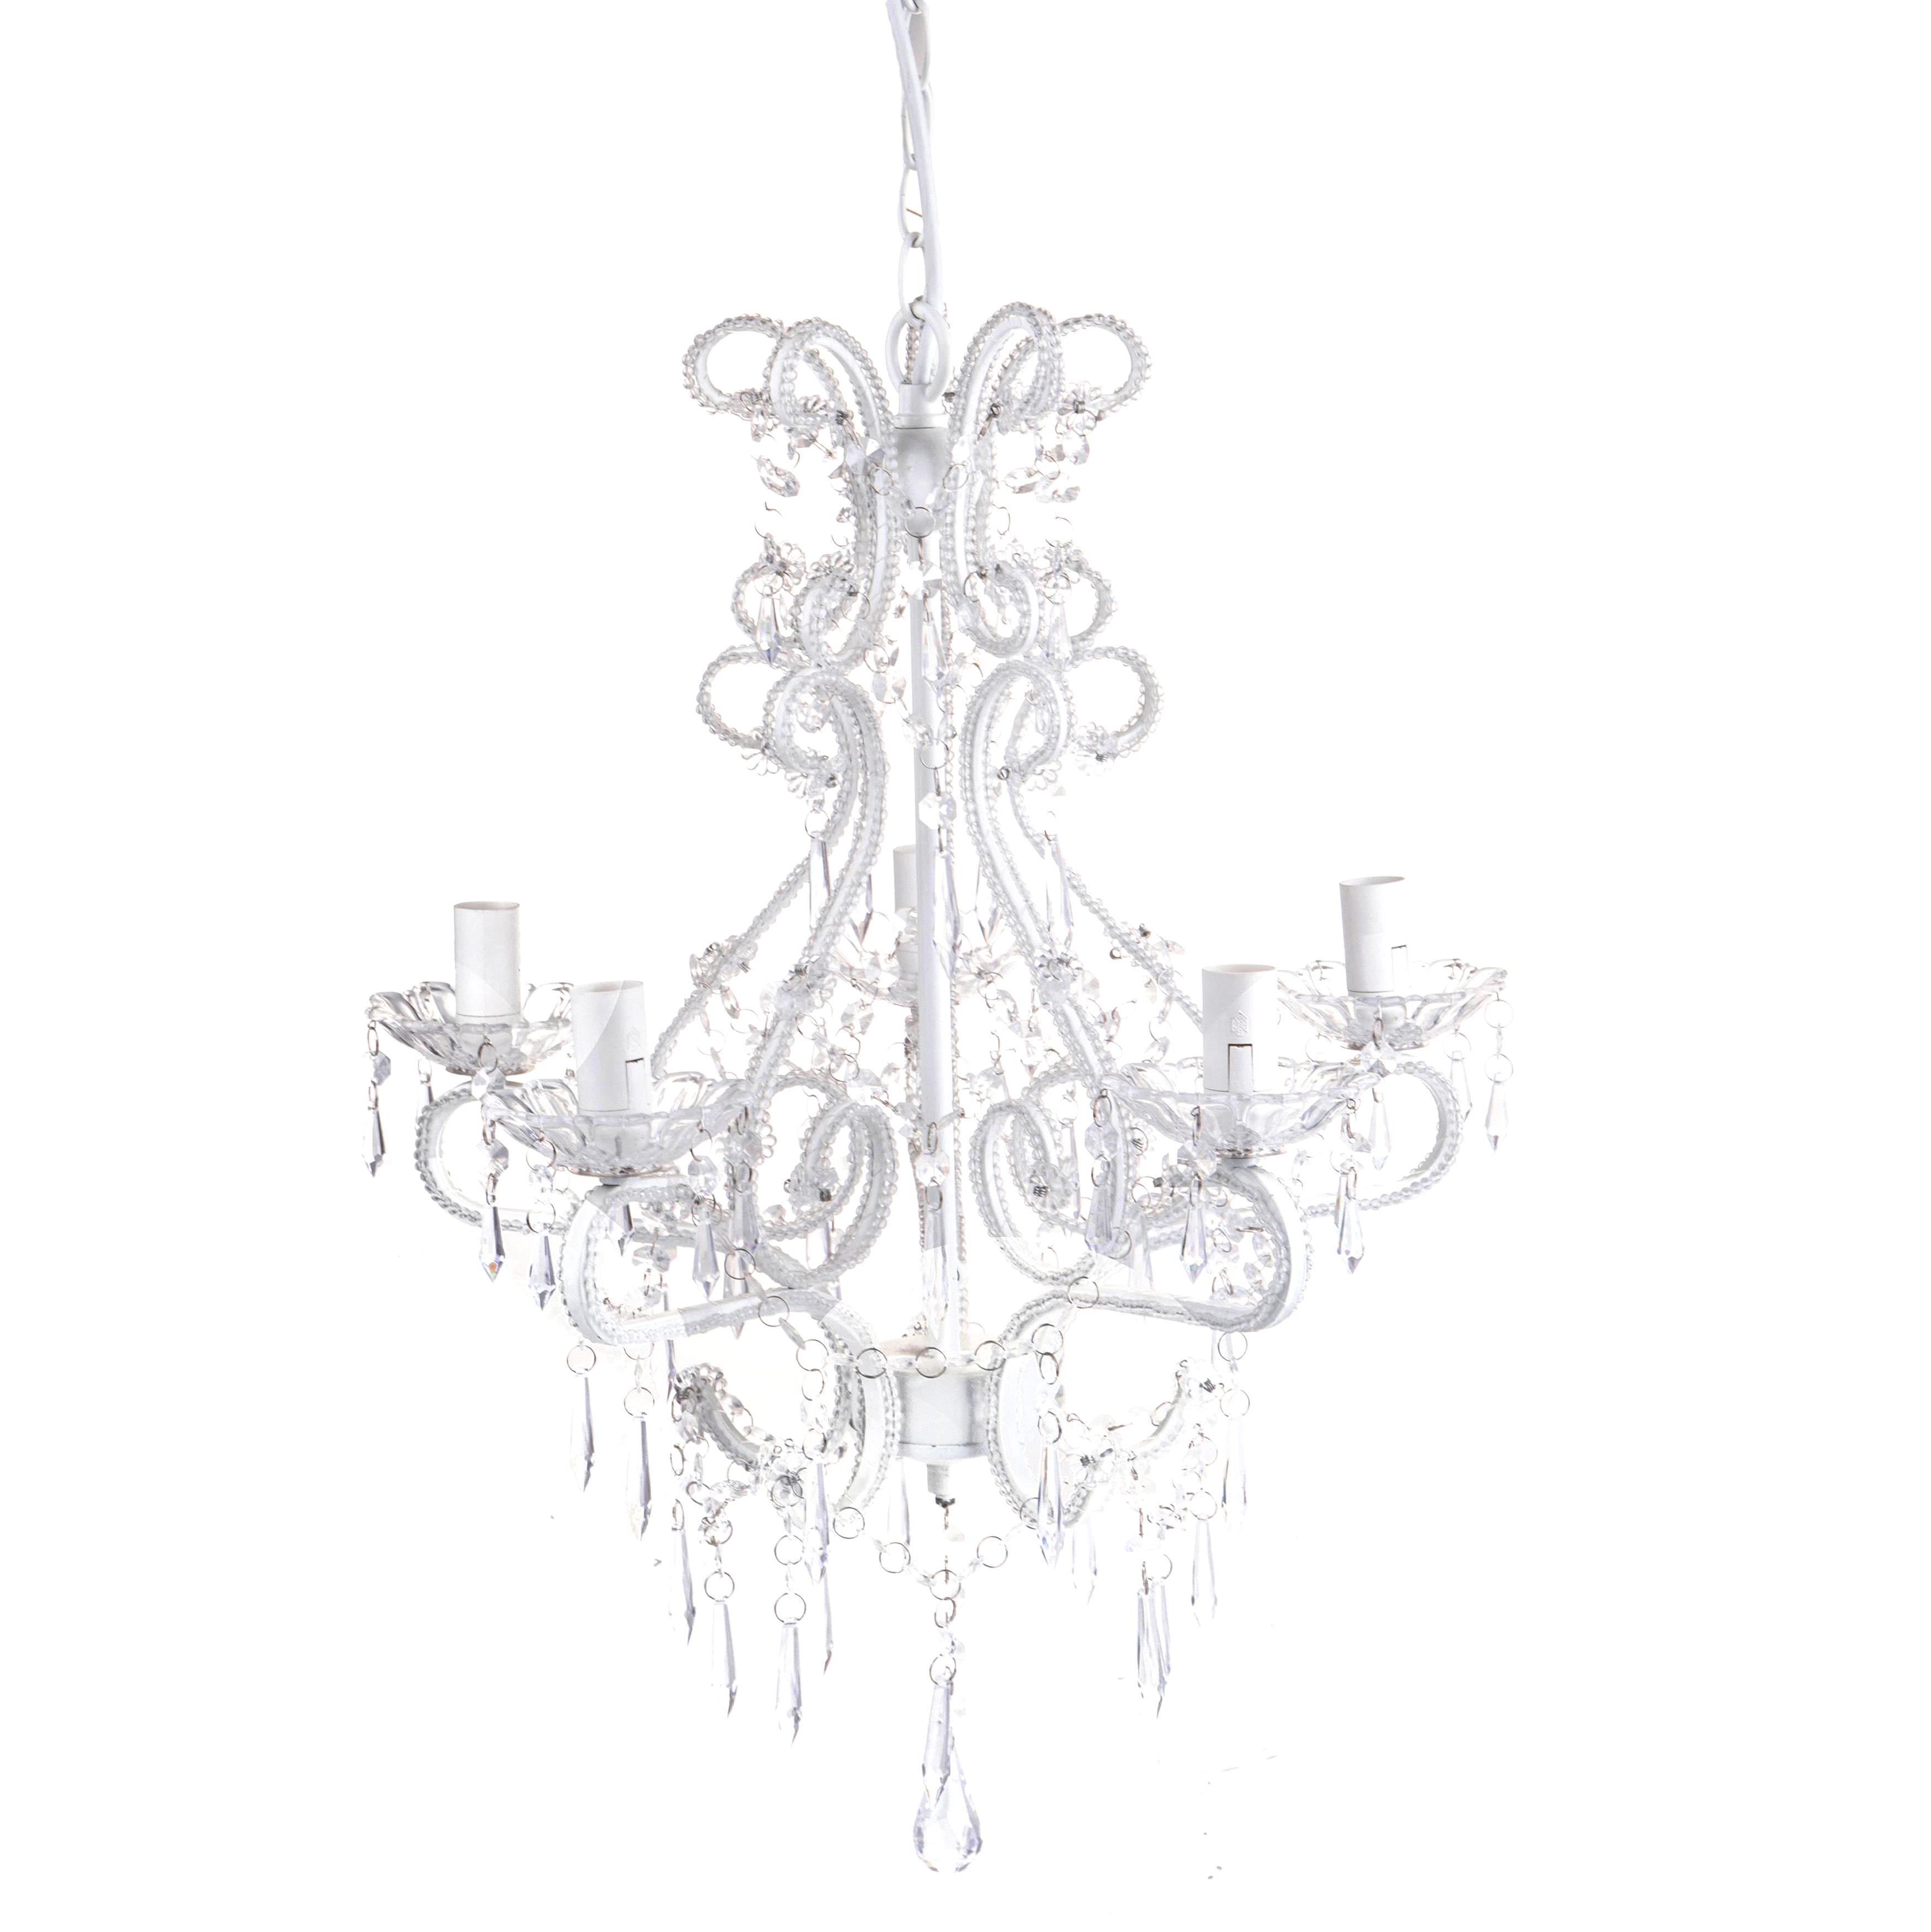 Home decors and accessories, LAMP AND CHANDELIER, LAMPADARIO VETRO A GOCCE 56 CM